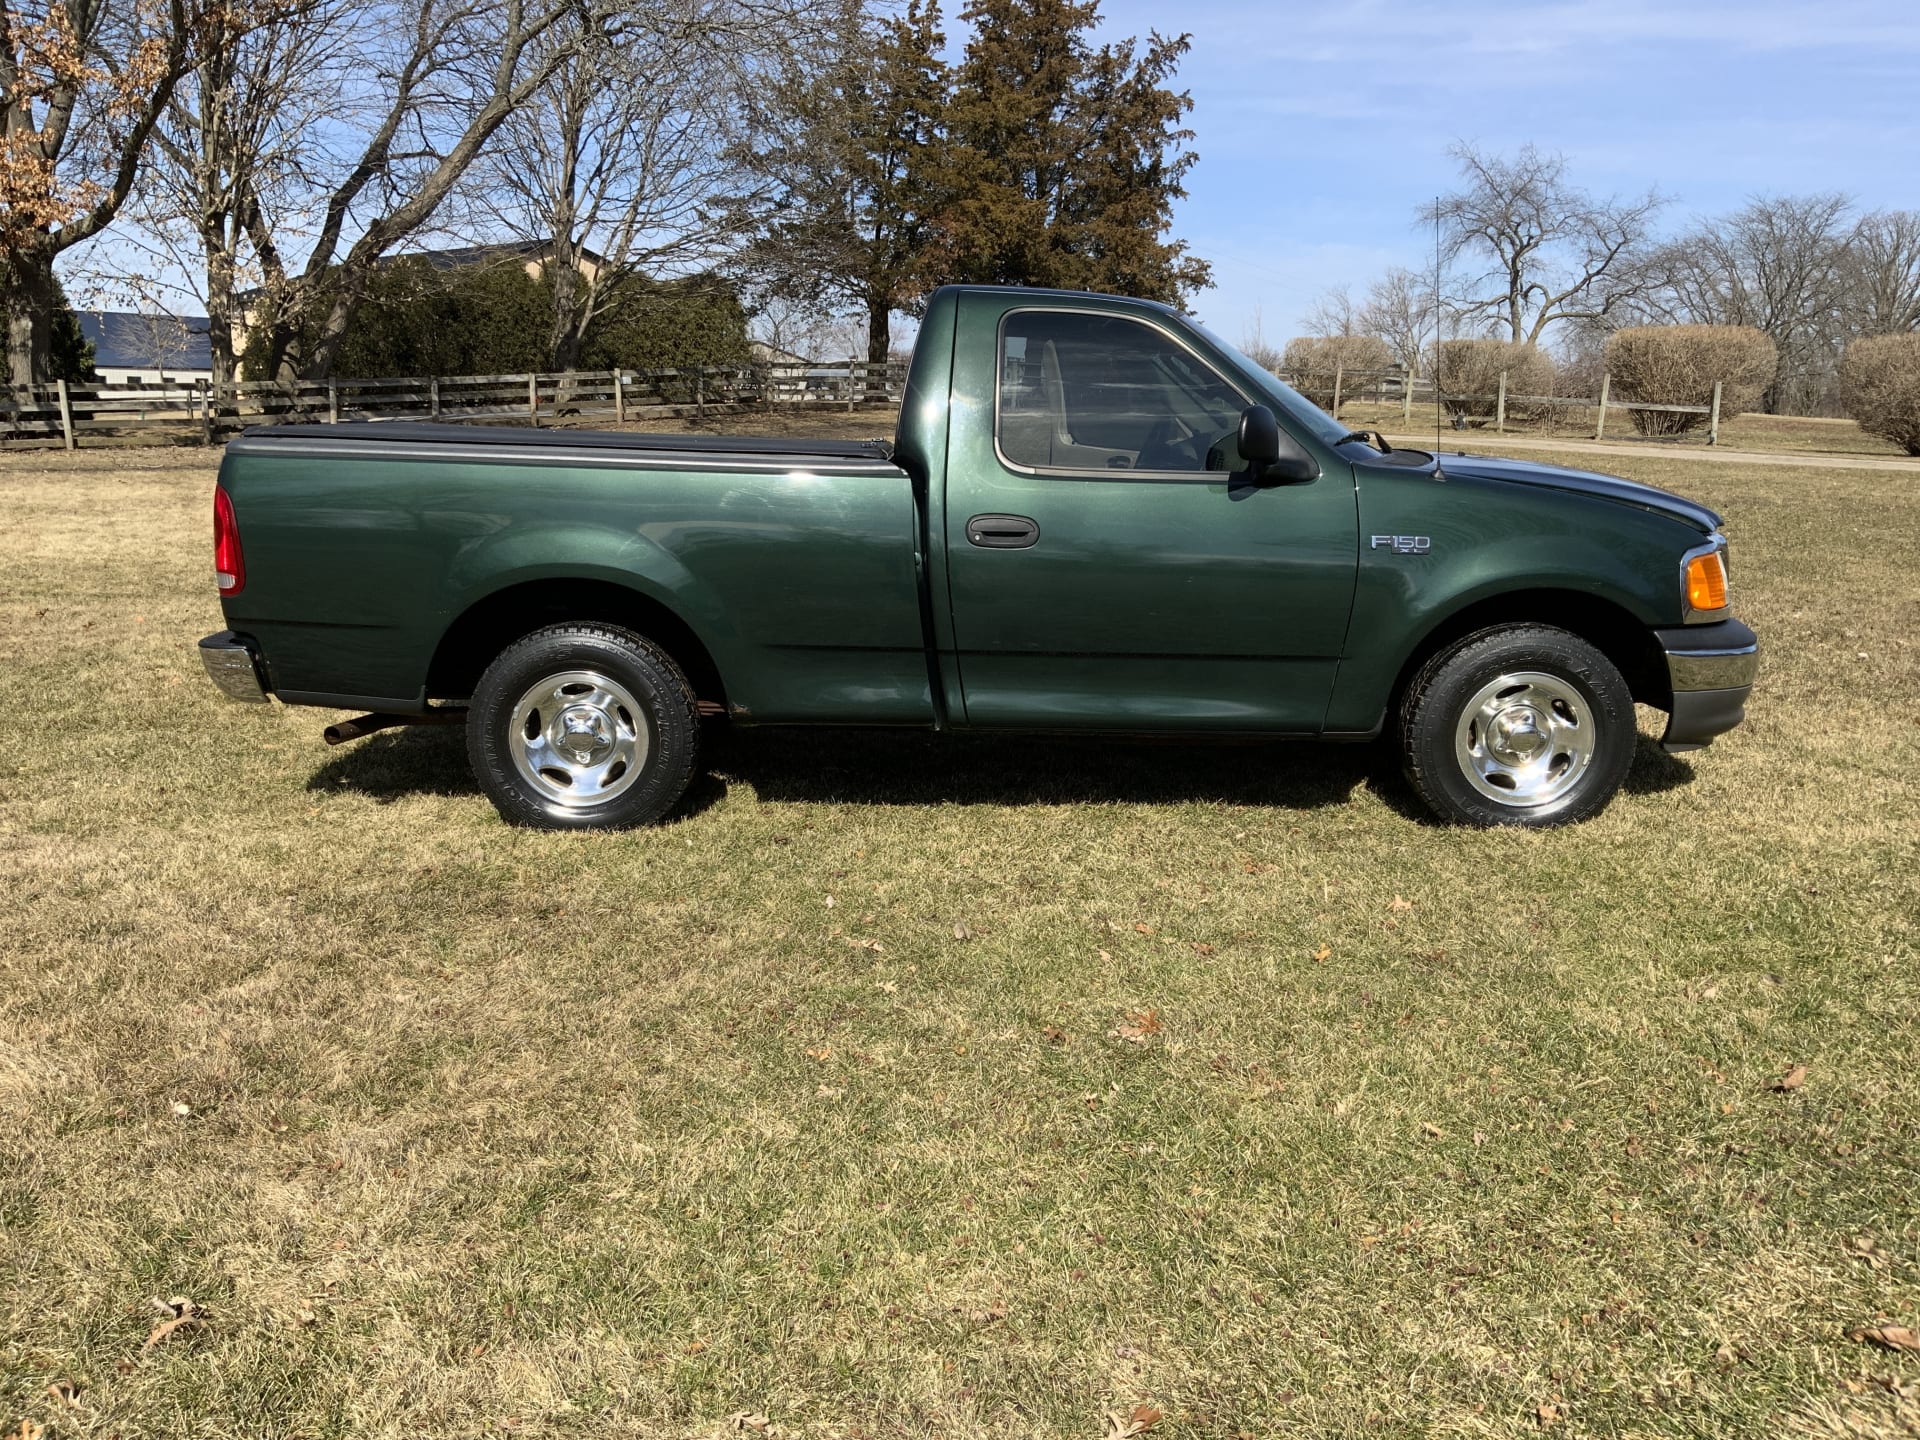 2004 Ford F150 Heritage Pickup At Gone Farmin Spring Classic 2023 As